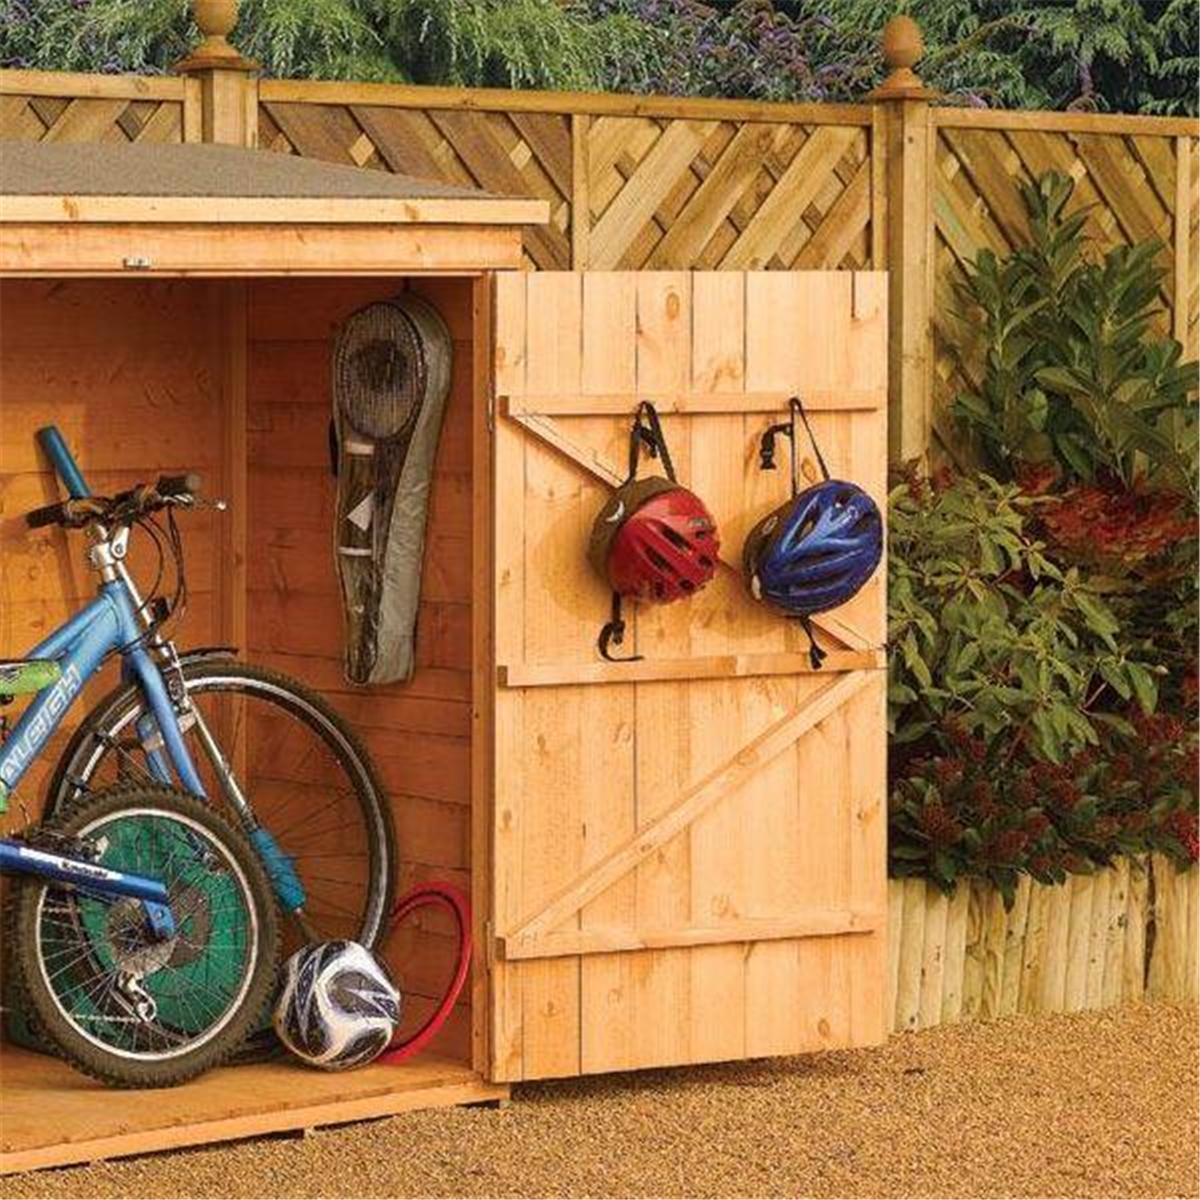 6 x 3 tongue and groove wallstore / bike shed 1825mm x